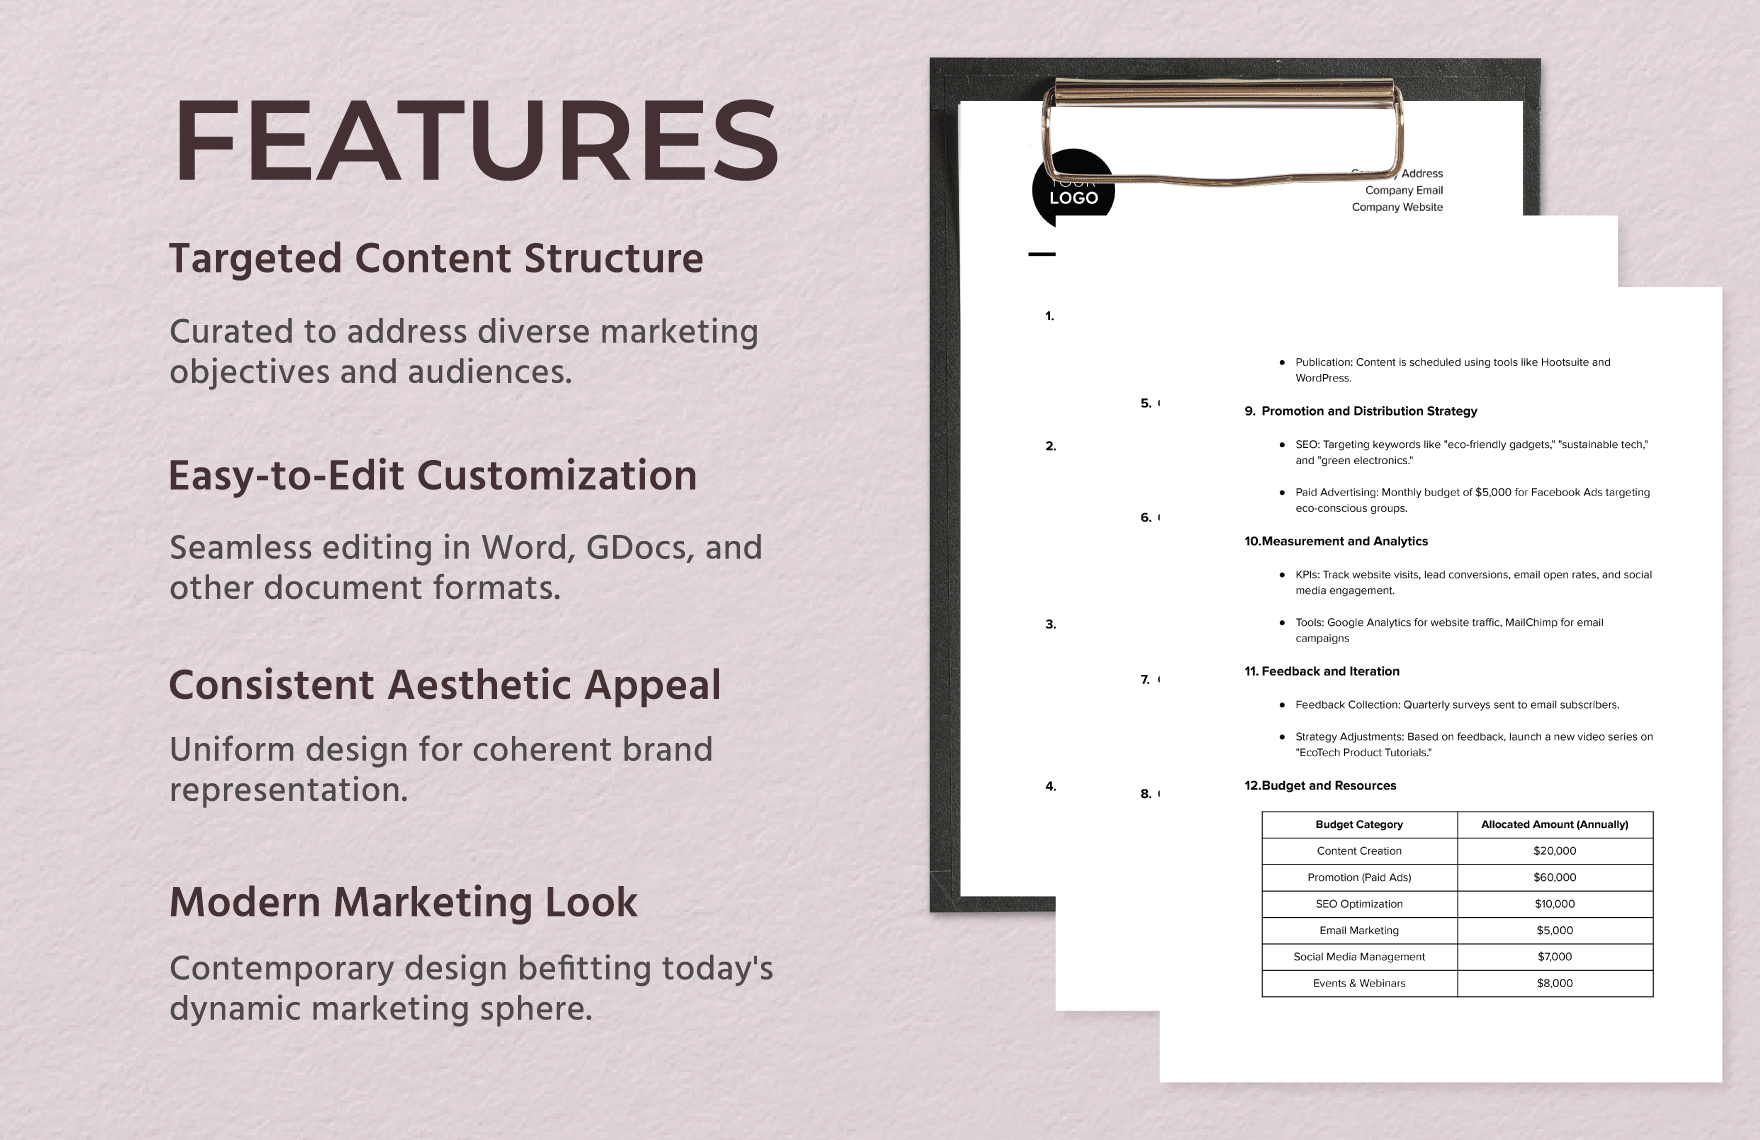 Marketing Content Strategy Outline Template